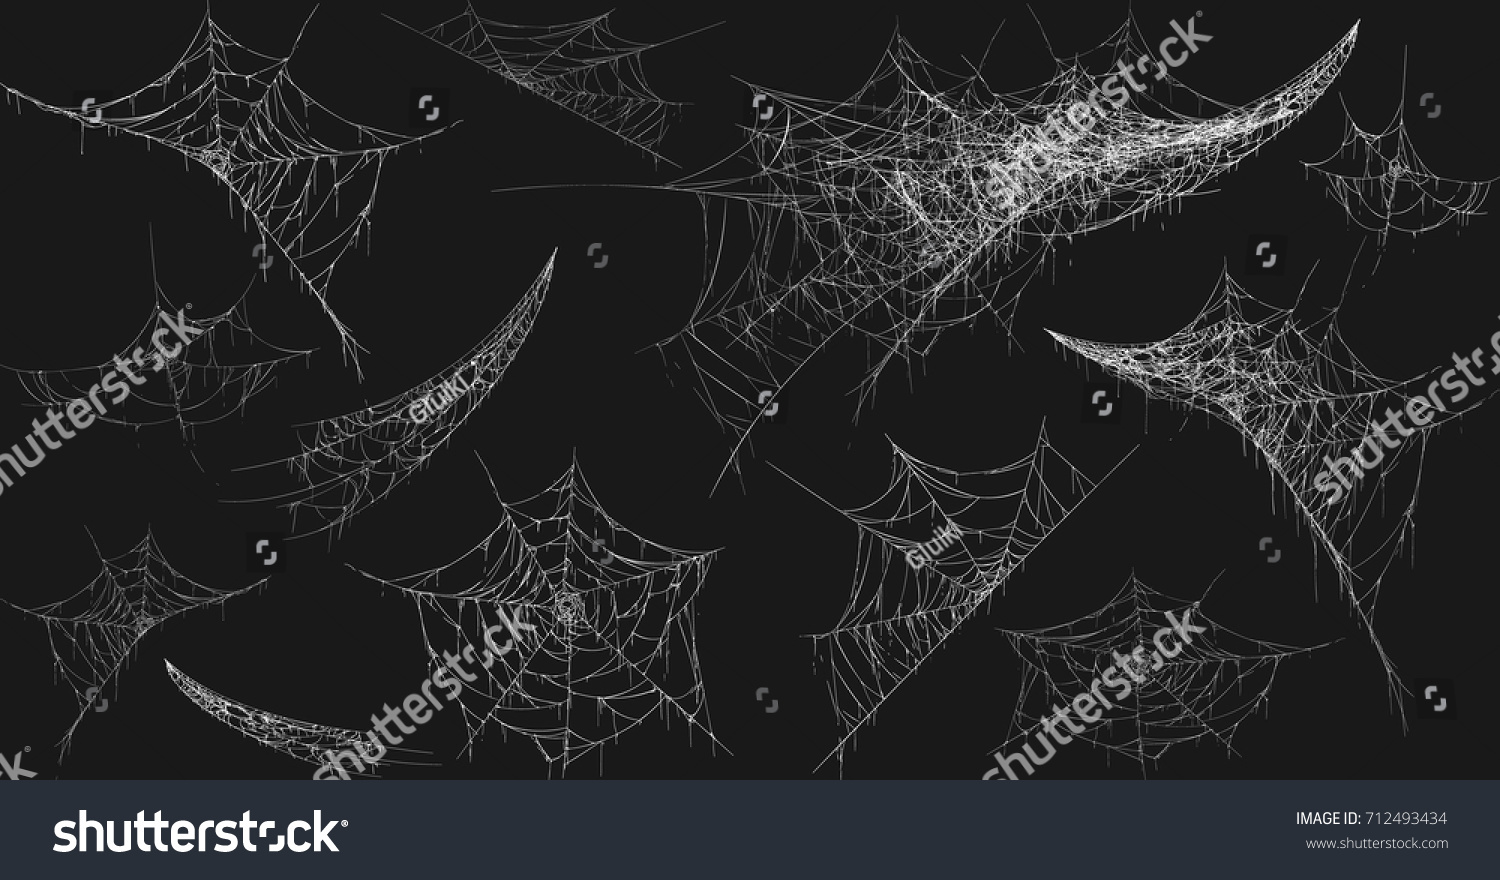 Collection of Cobweb, isolated on black, transparent background. Spiderweb for Halloween design. Spider web elements,spooky, scary, horror halloween decor. Hand drawn silhouette, vector illustration #712493434